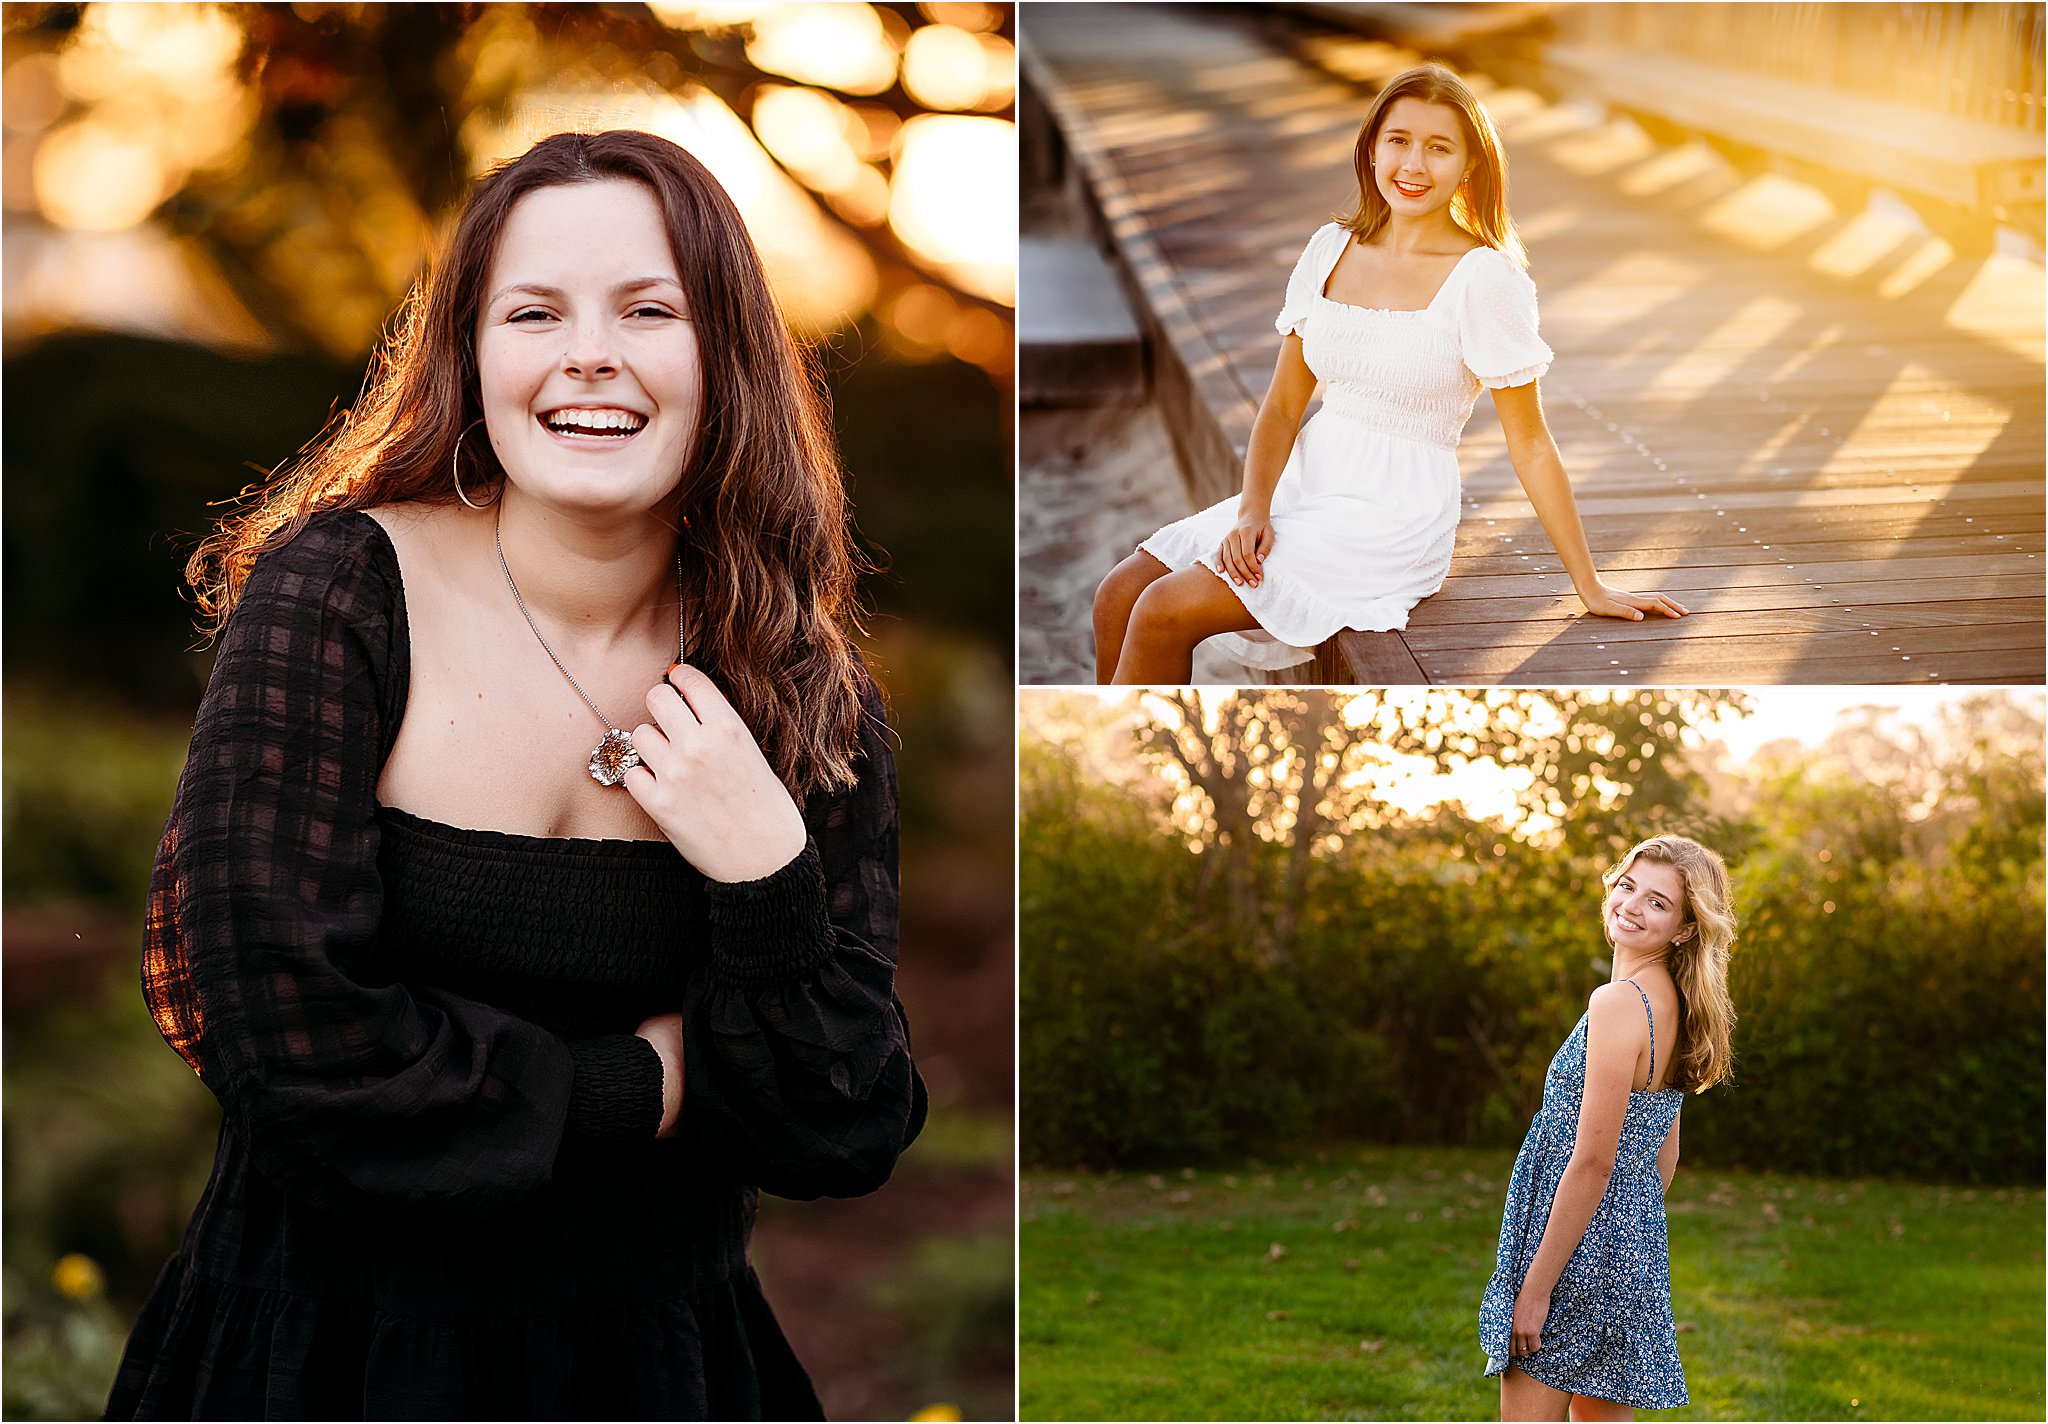 Three high school seniors at the beach, Why you should have hire a professional photographer for your senior photos, CT Shoreline Senior photographer